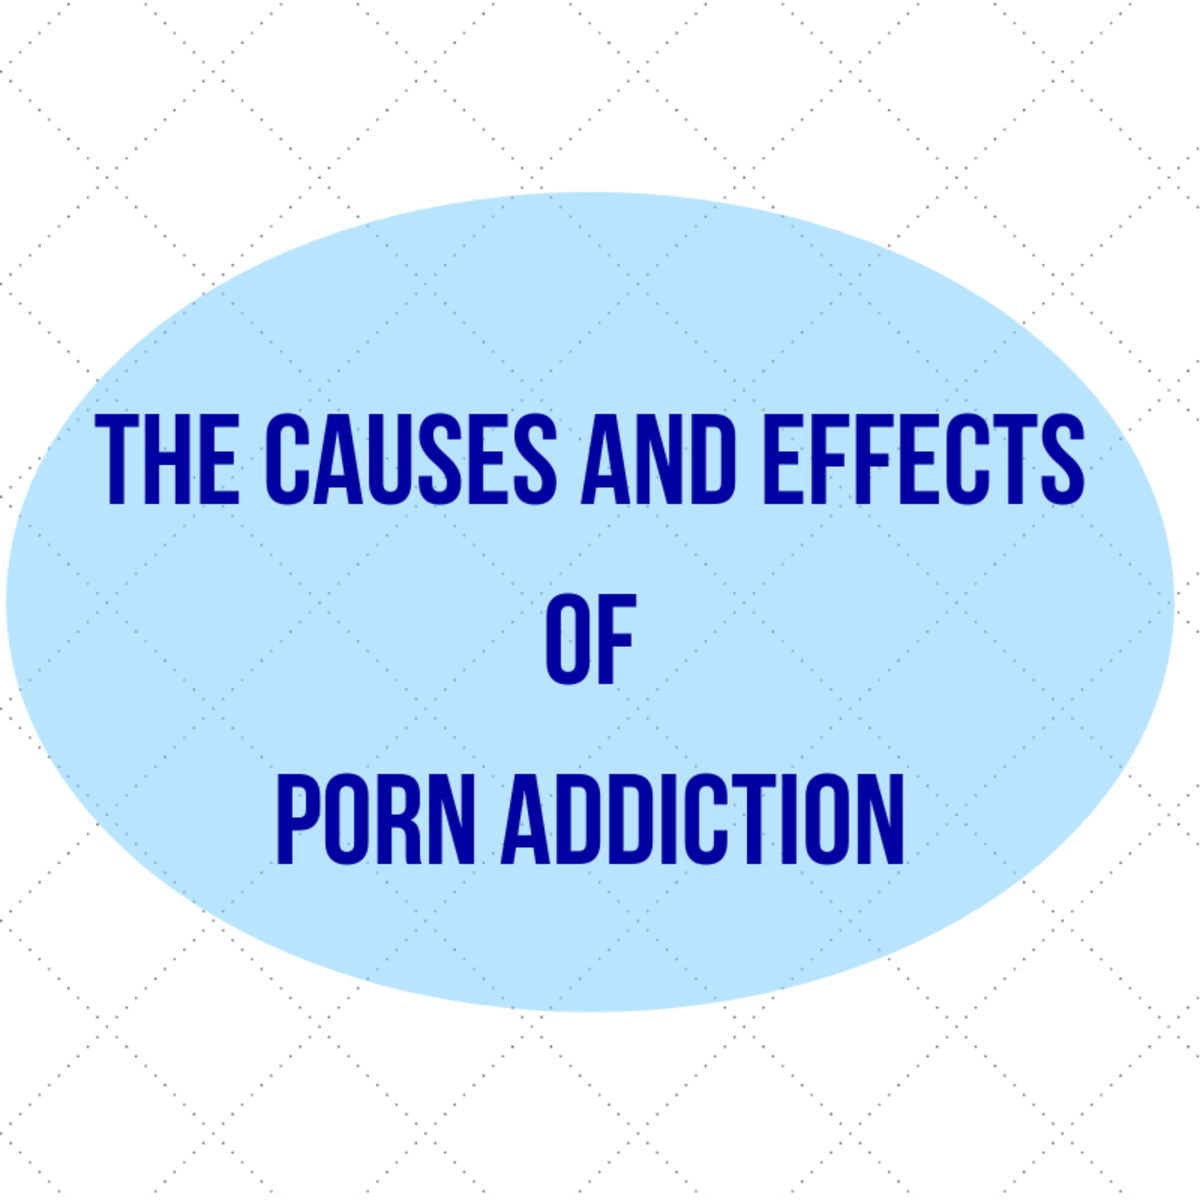 The Causes and Effects of Porn Addiction